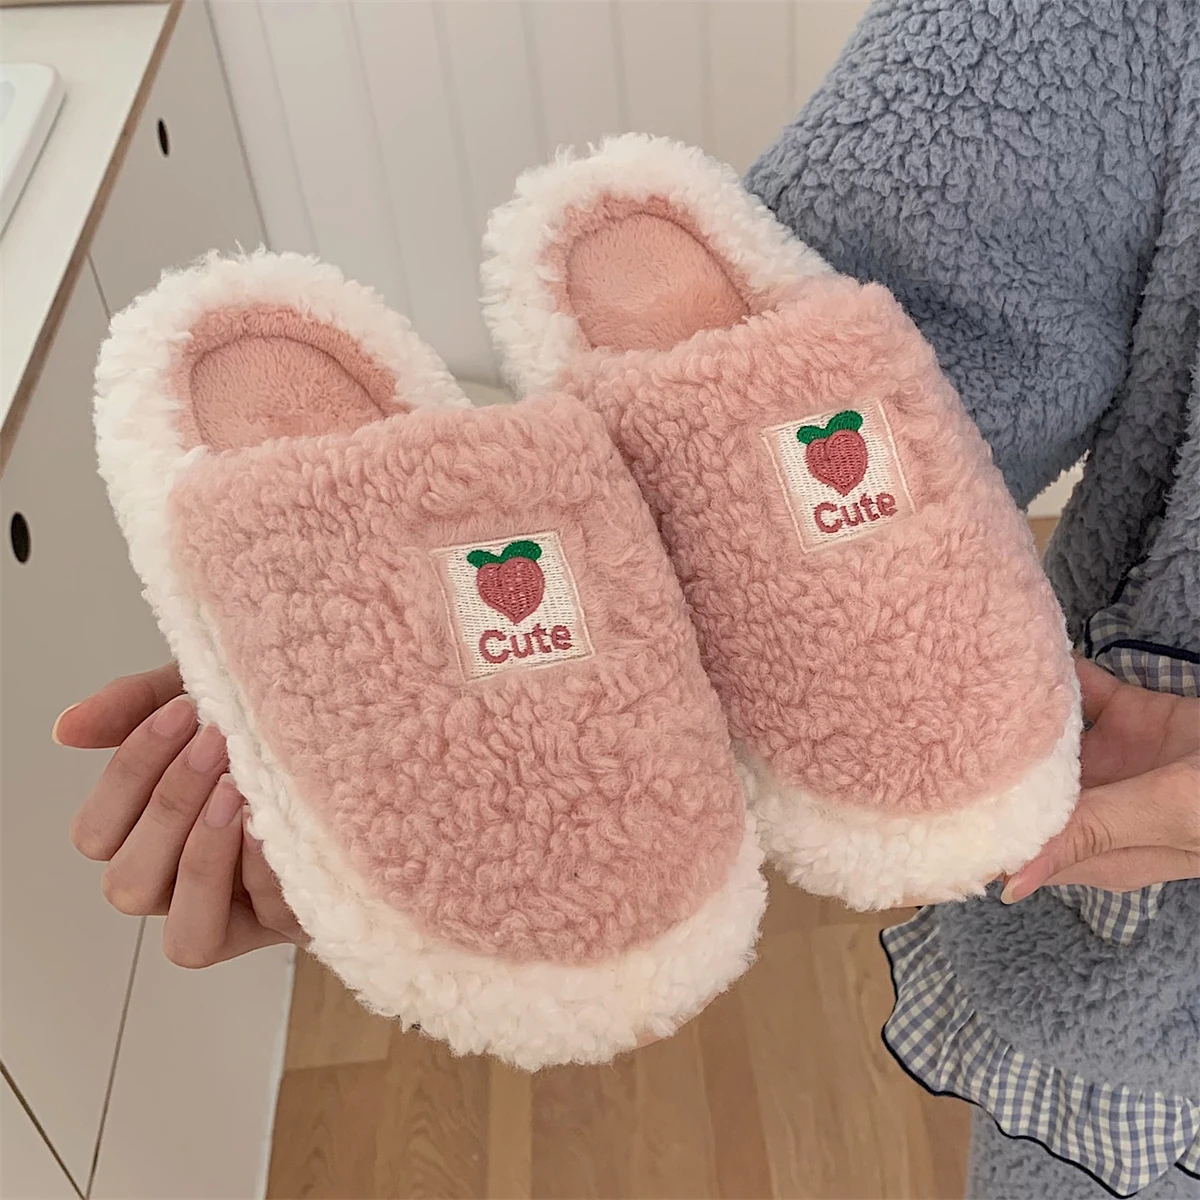 Cute Slipper For Women Girls Fashion Kawaii Fluffy Winter Warm Slippers Woman Lovely Red Heart House Slippers Funny Shoes images - 6